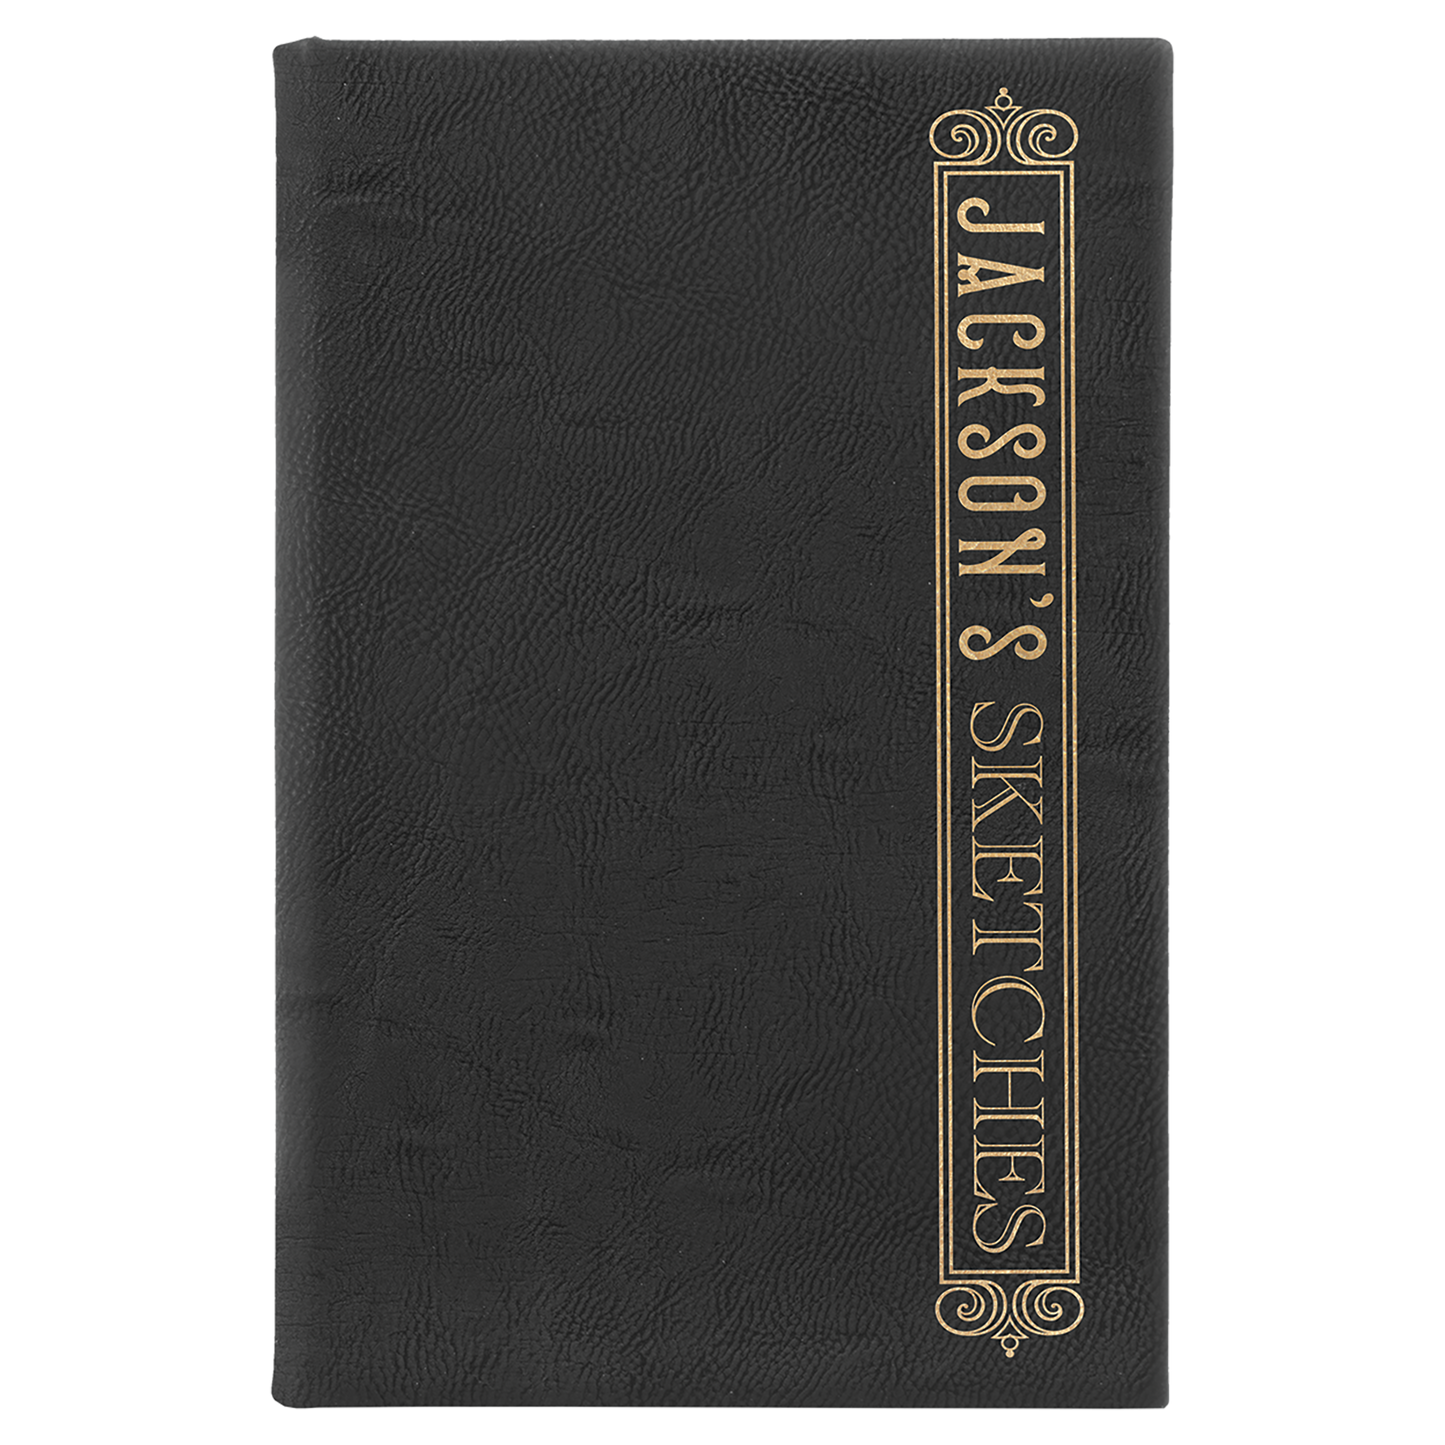 Sketch Book Journal 5 1/4" x 8 1/4" Leatherette - UNLINED Paper